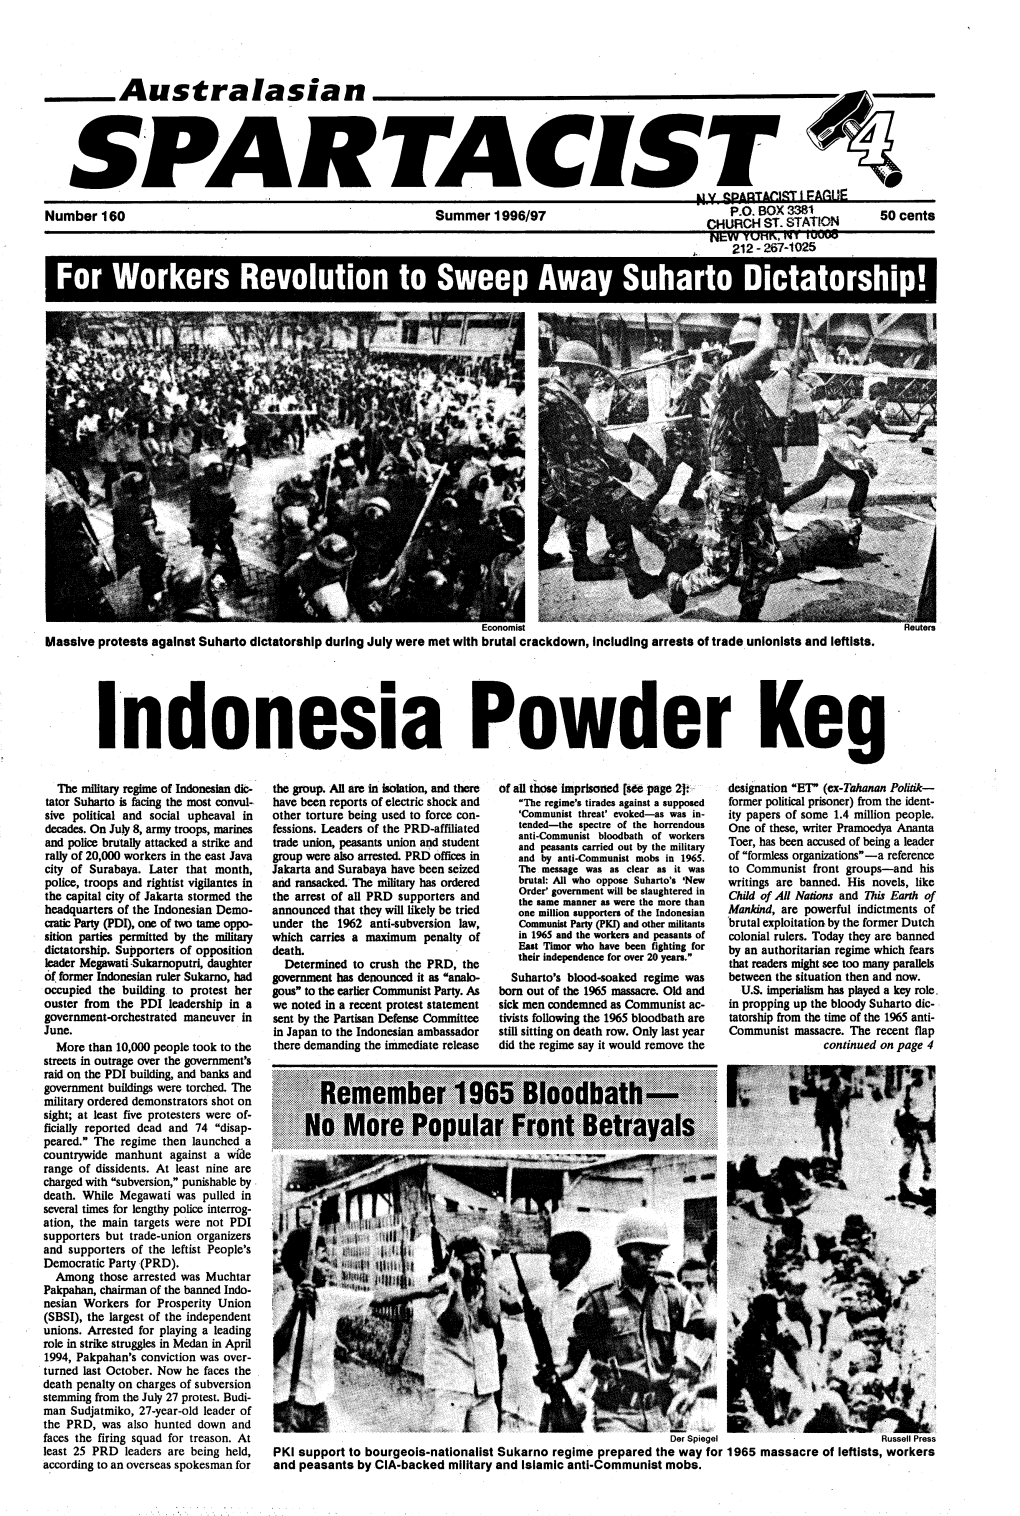 For Workers Revolution to Sweep Away Suharto Dictatorship!